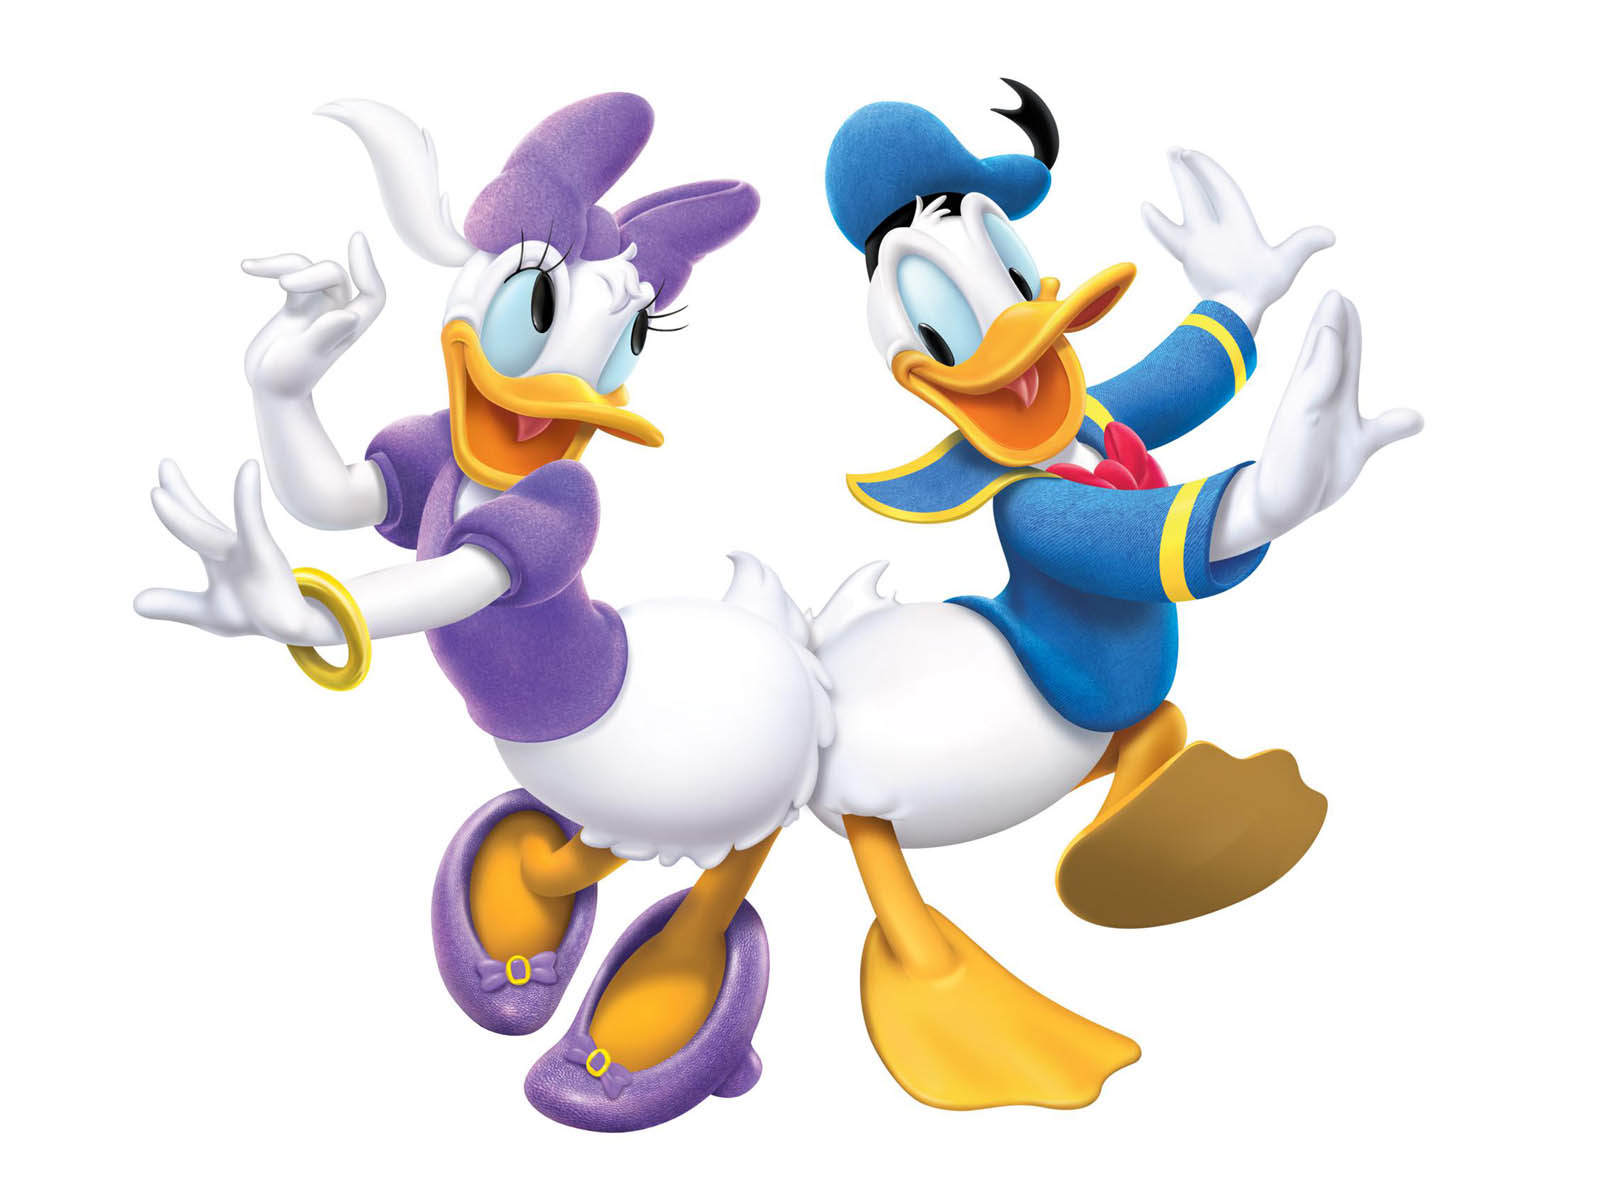 Tag Donald Duck Wallpaper Image Photos Pictures And Background